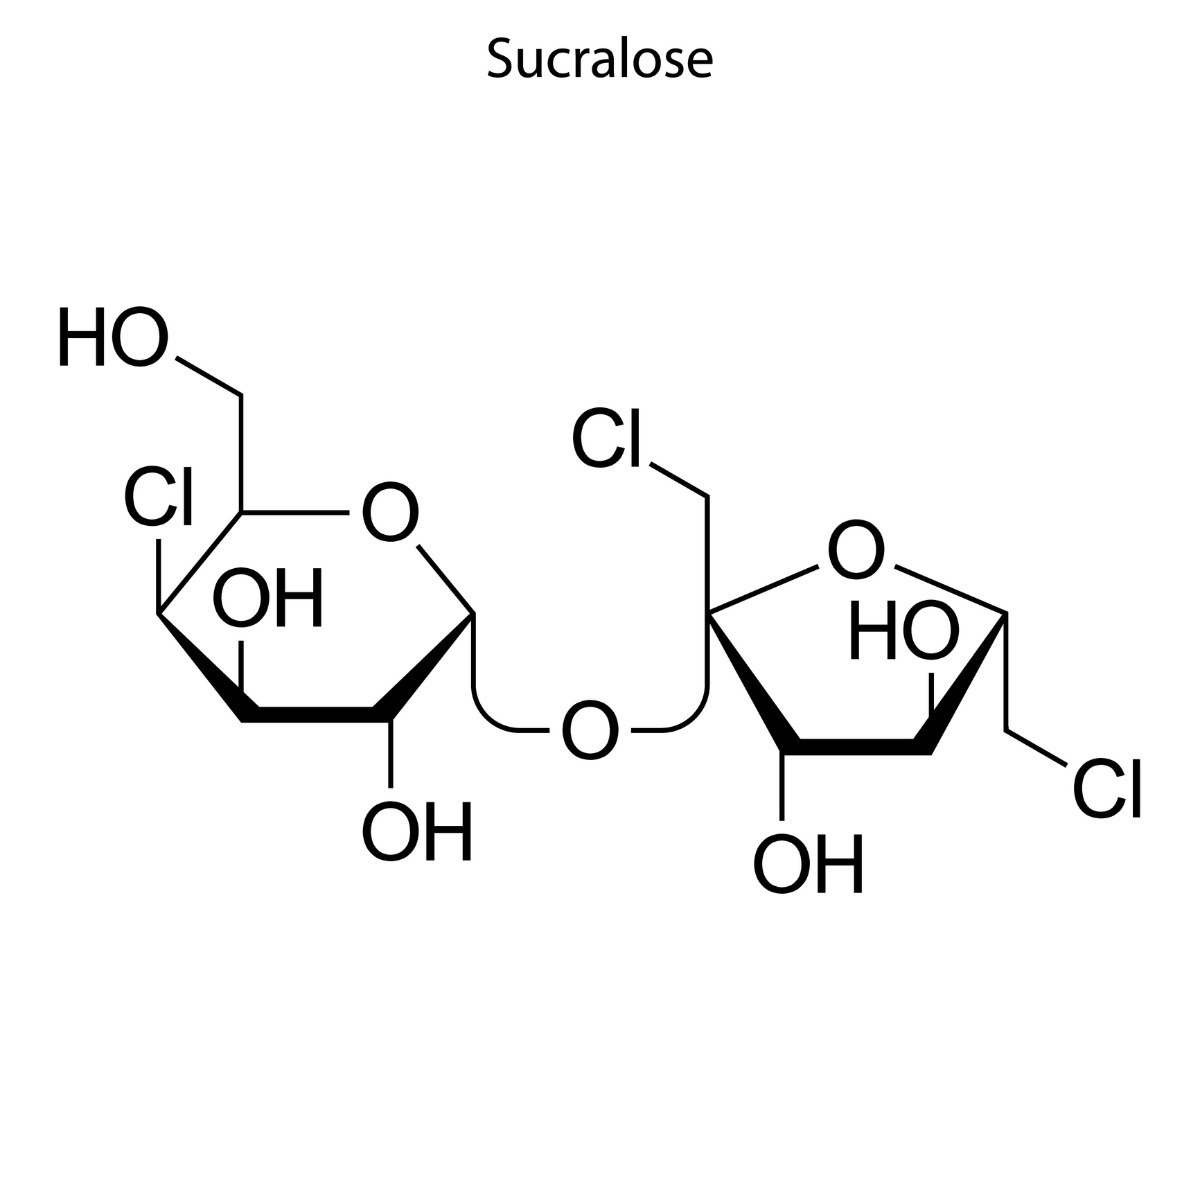 Sucralose - artificial sweetener and its impact on health